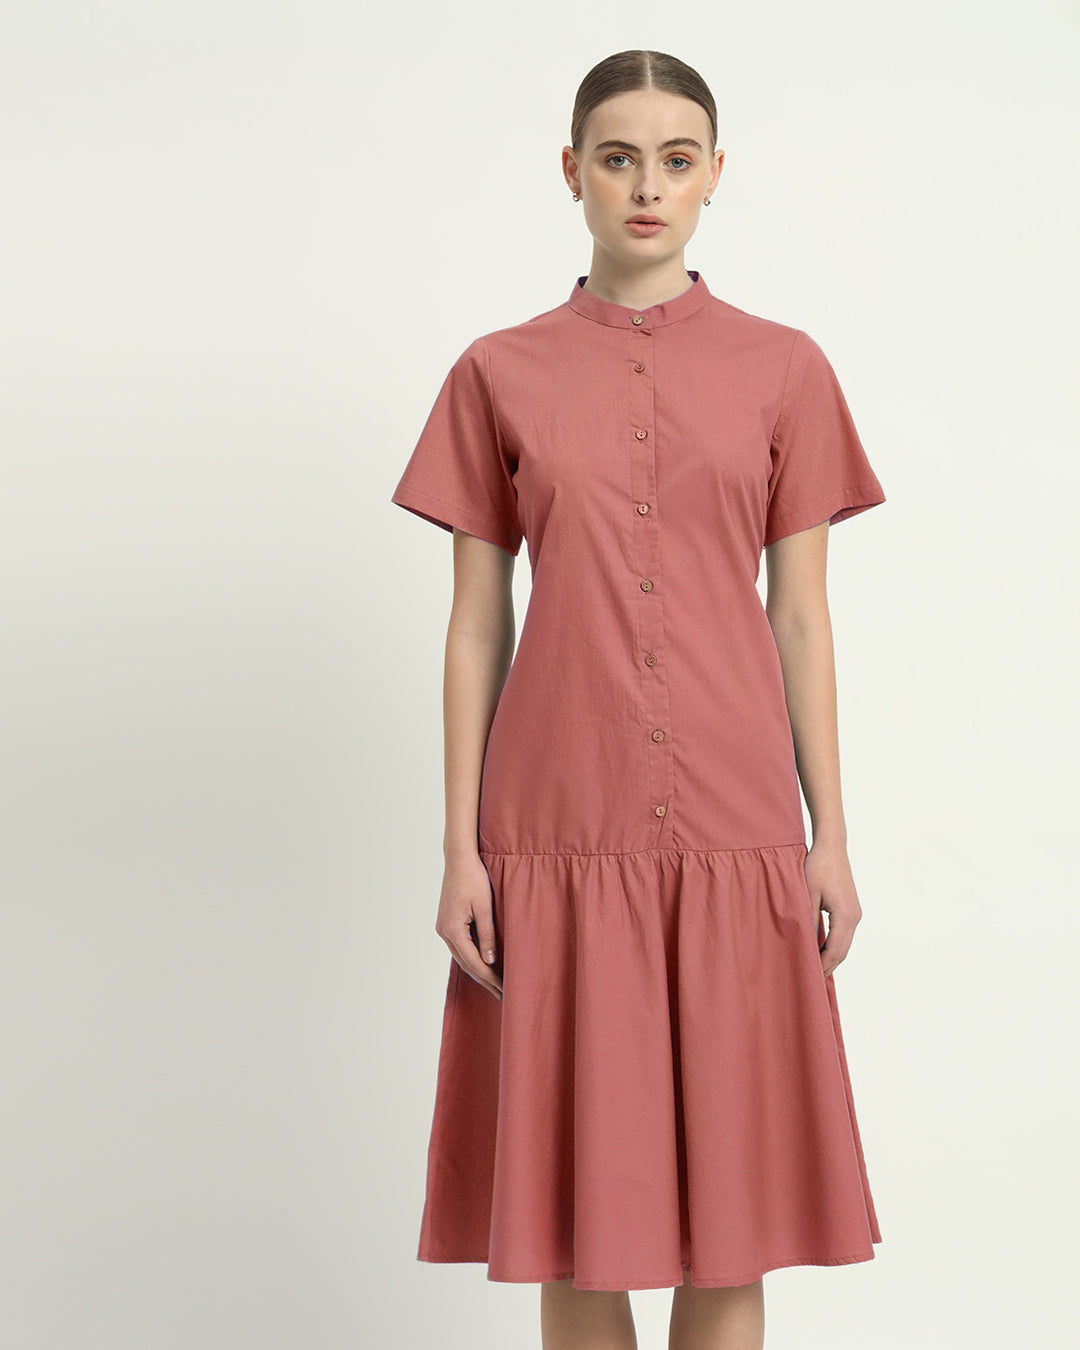 The Ivory Pink Melrose Cotton Dress